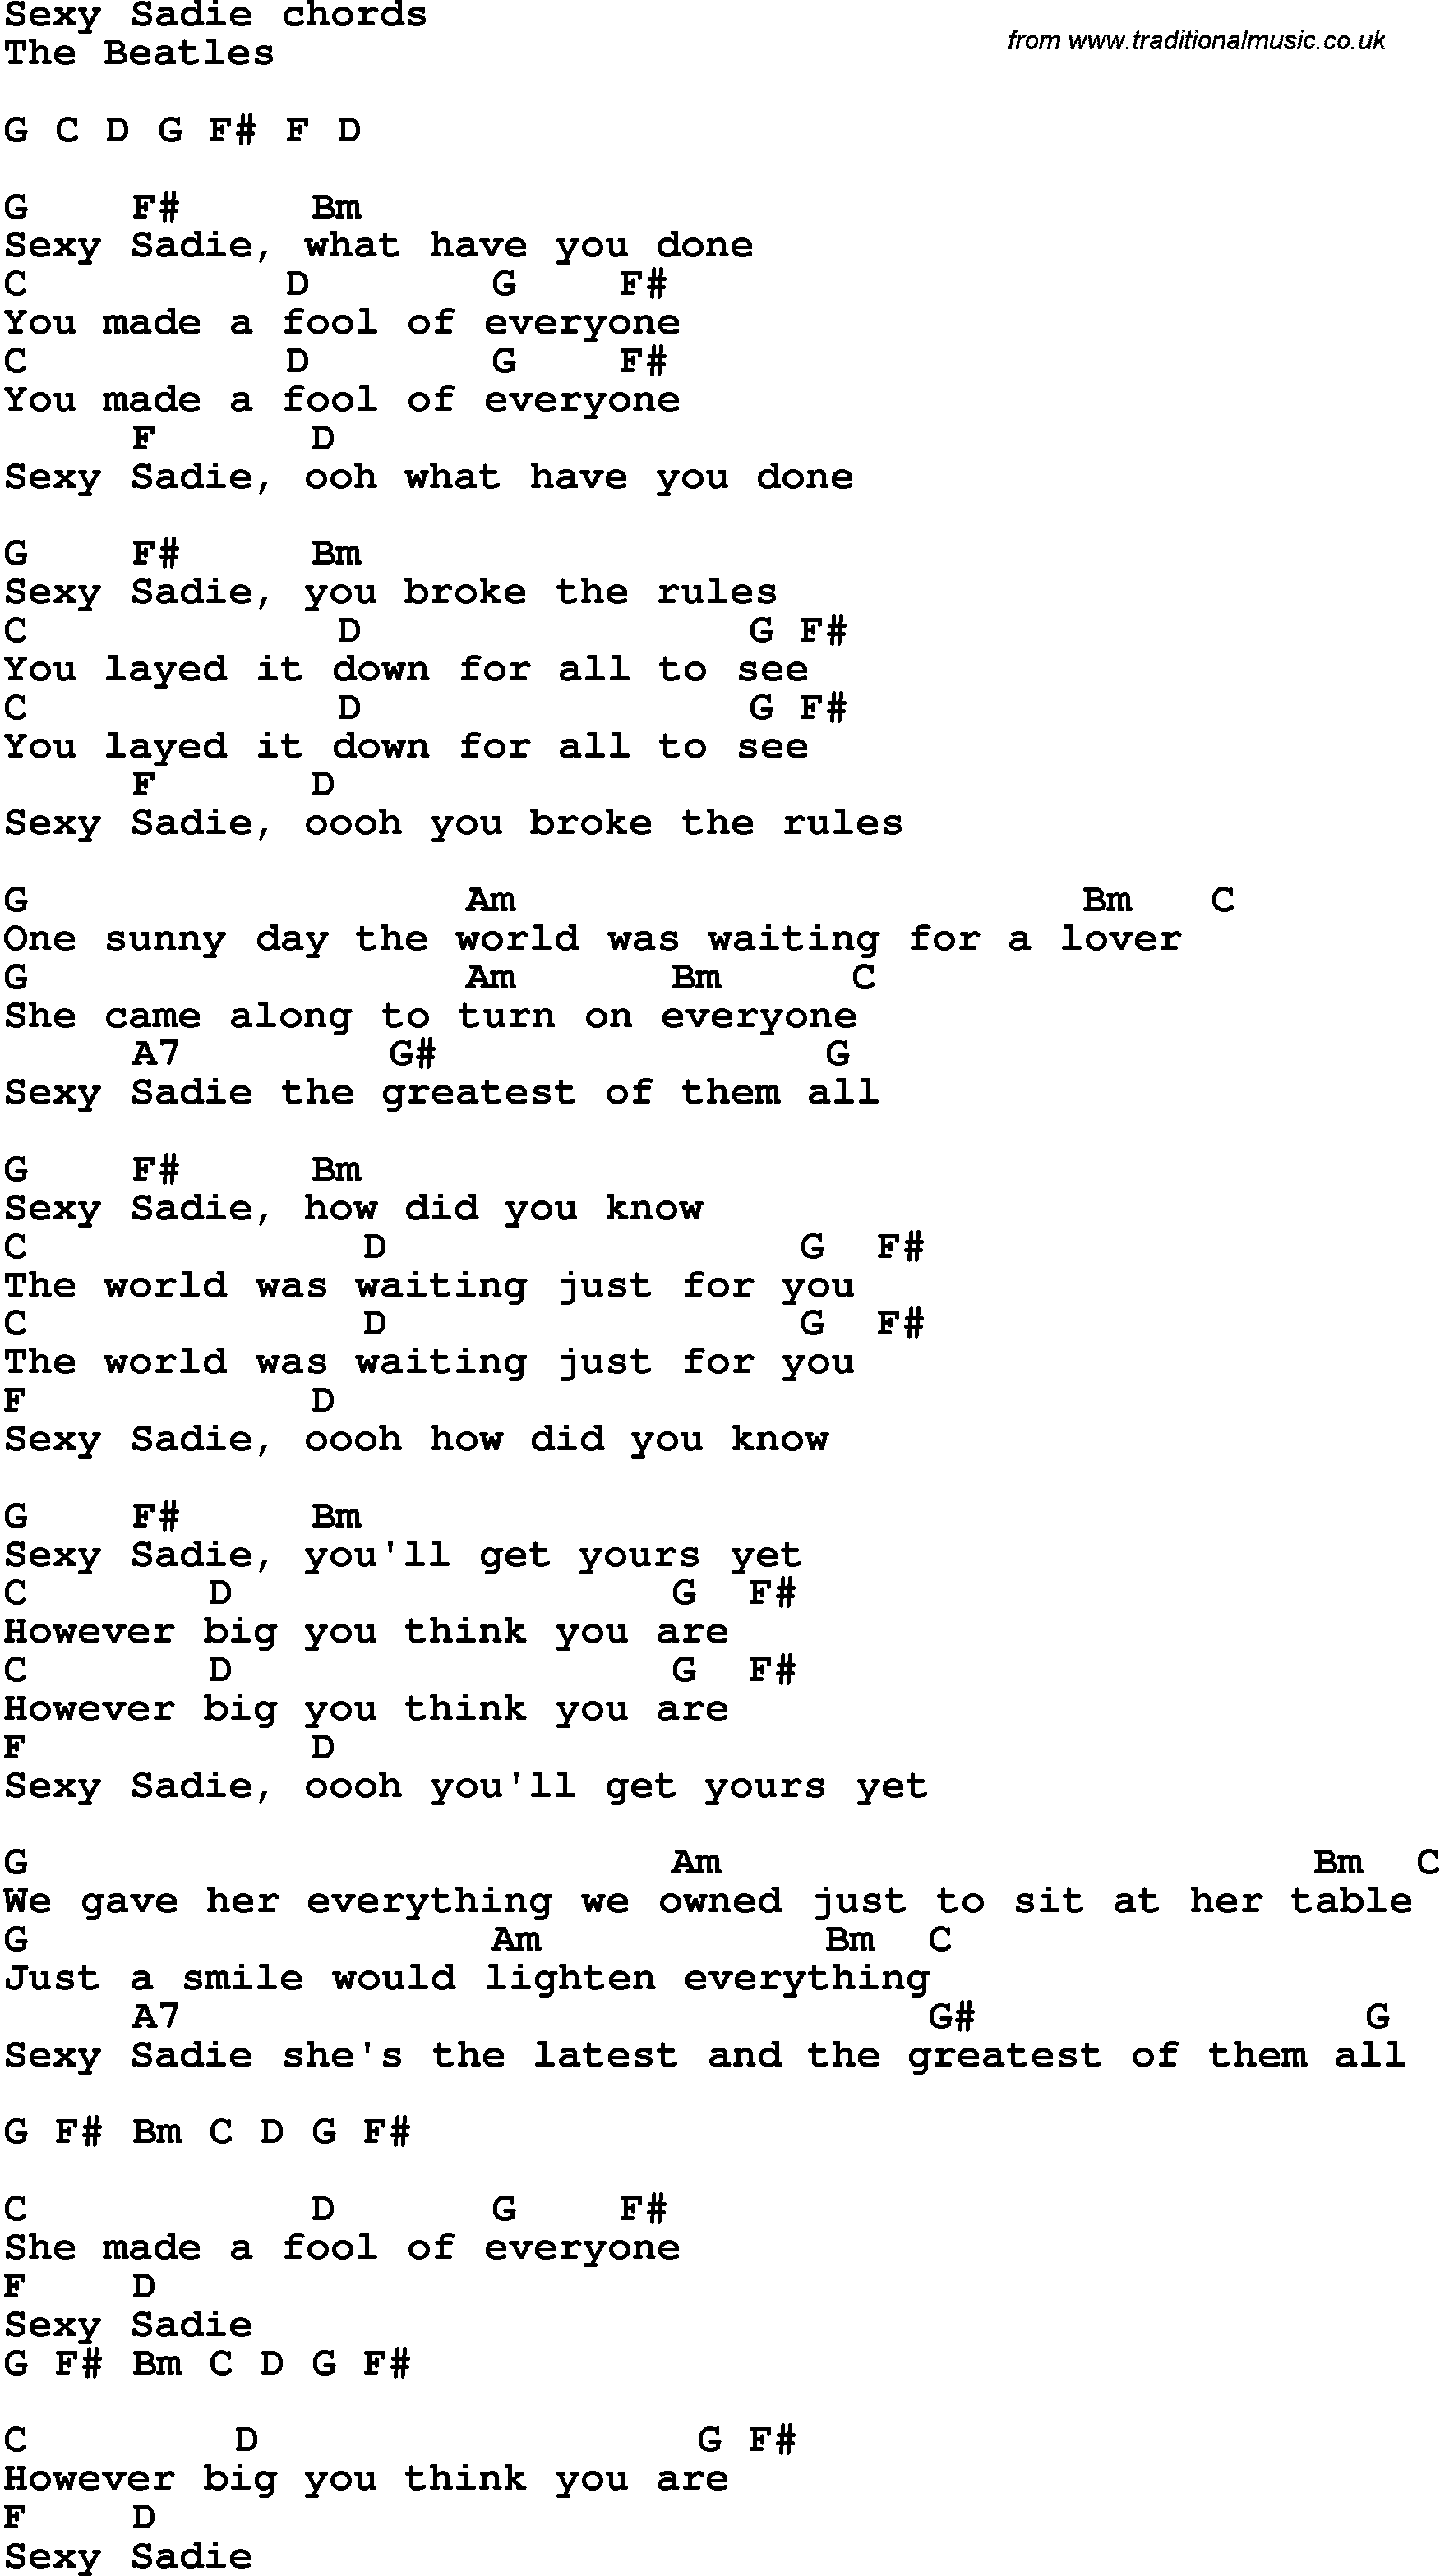 Song Lyrics with guitar chords for Sexy Sadie - The Beatles